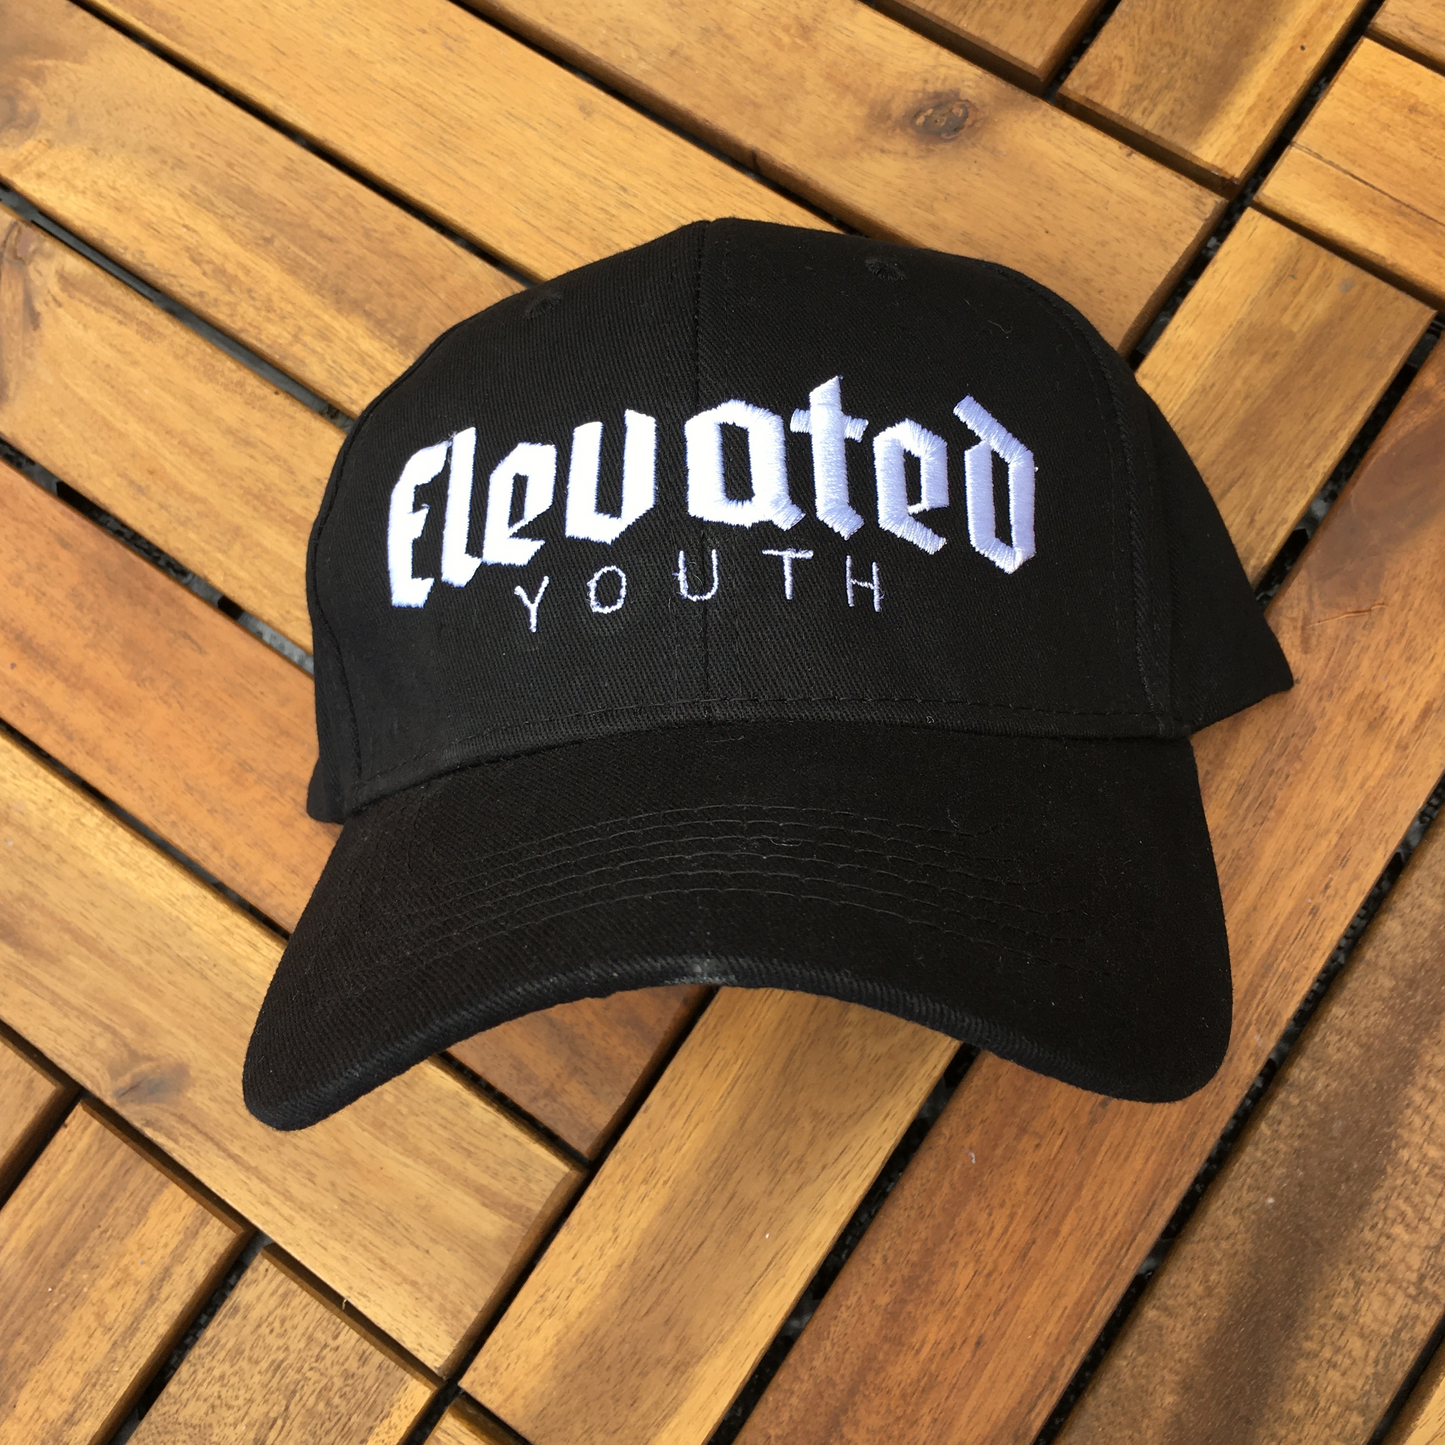 Elevated Youth Embroidered Cap